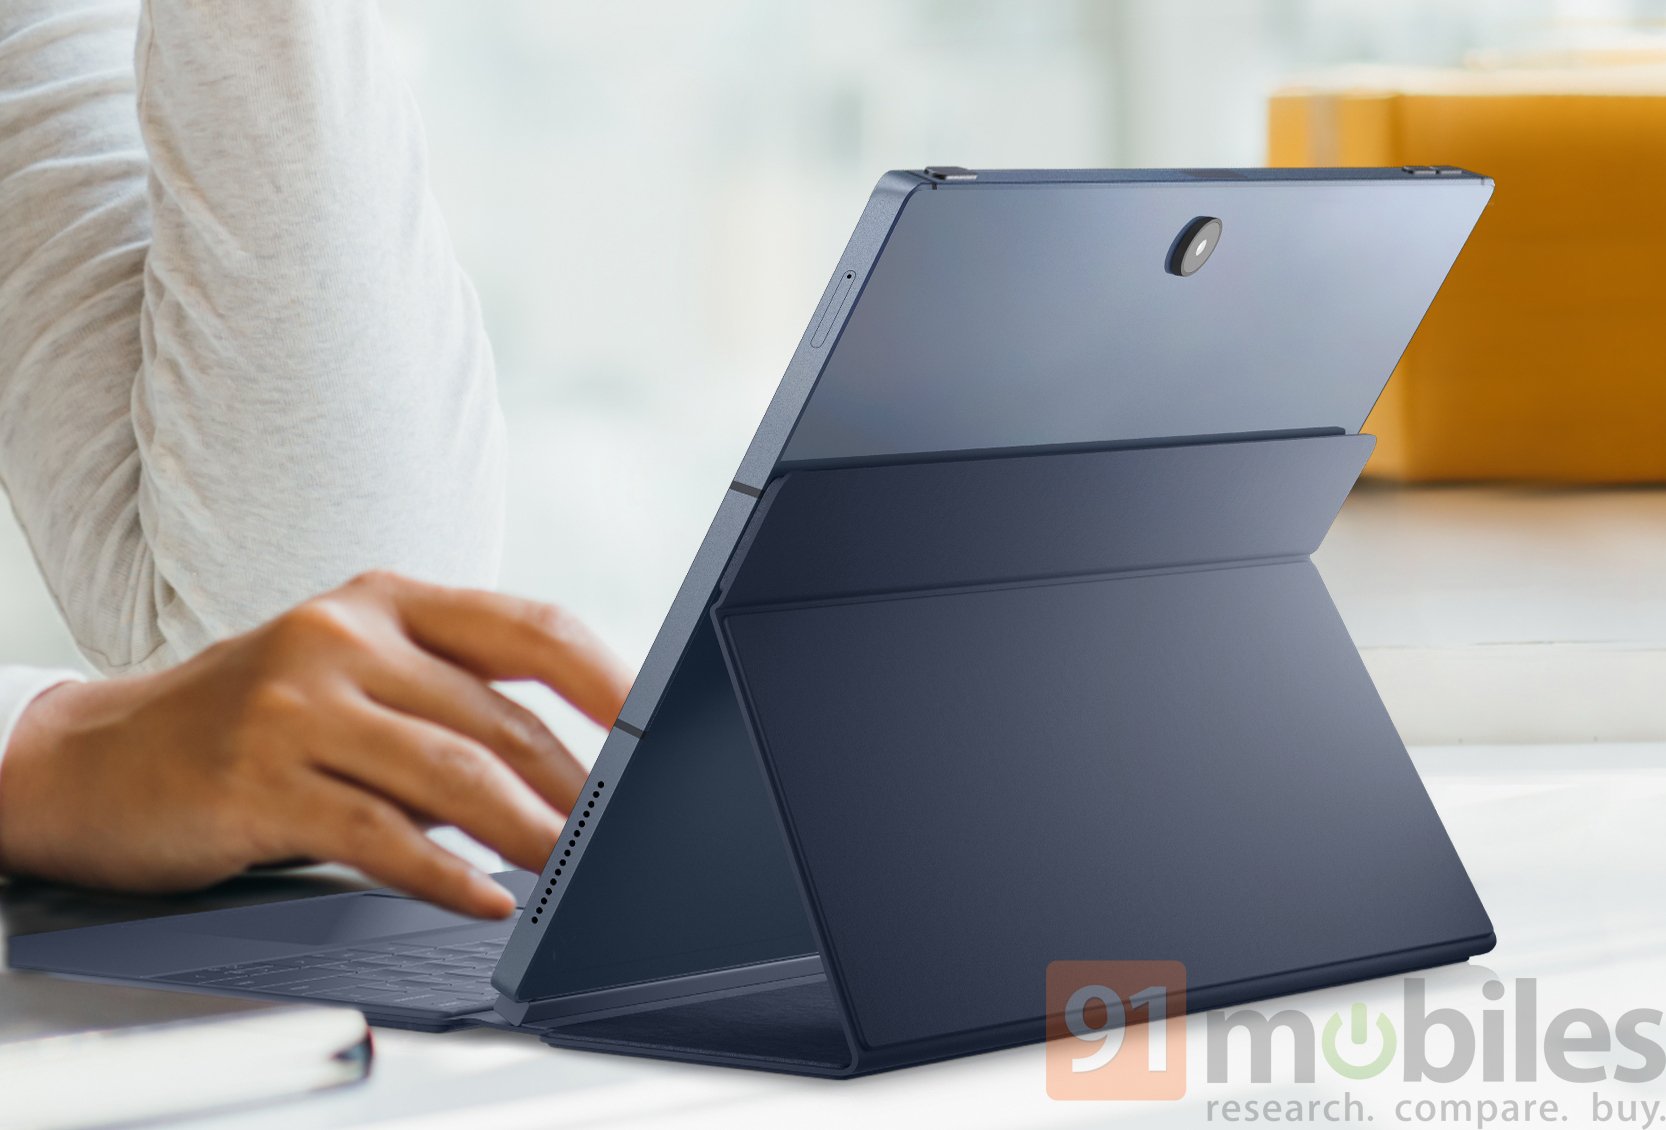 Here are the Images of Dell’s first fully detachable XPS 2in1 hybrid